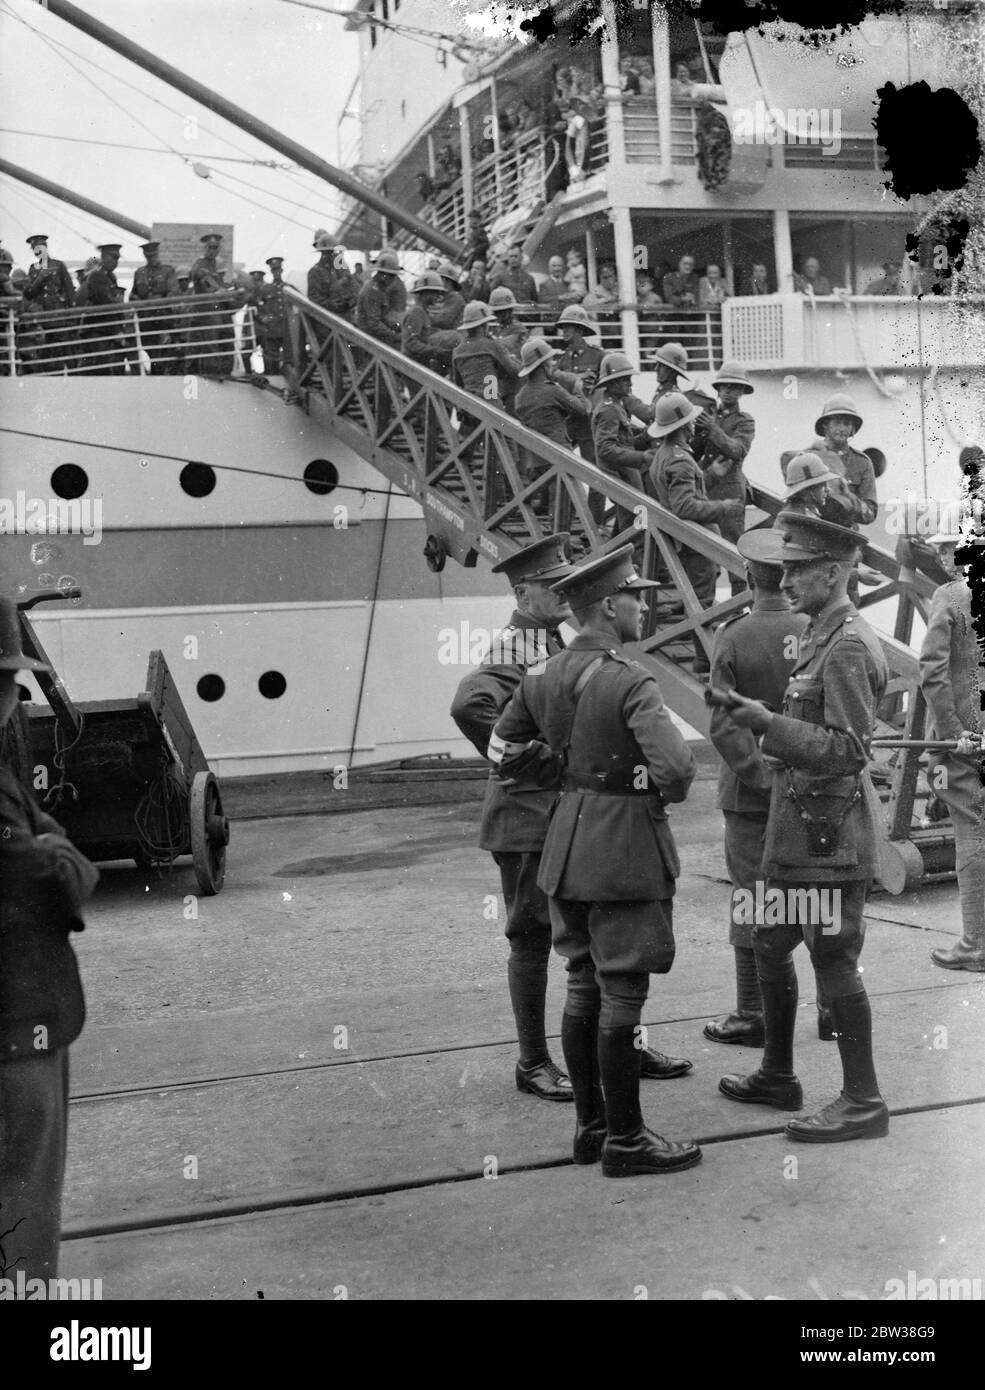 First troopship of the season . The first troopship of the season to leave Southampton was the SS Neuralia . She is taking a battalion of the Royal Berkshire regiment and other detachments to Bombay . Photo shows , troops going aboard the SS Neuralia at Southampton . 7 September 1934 Stock Photo